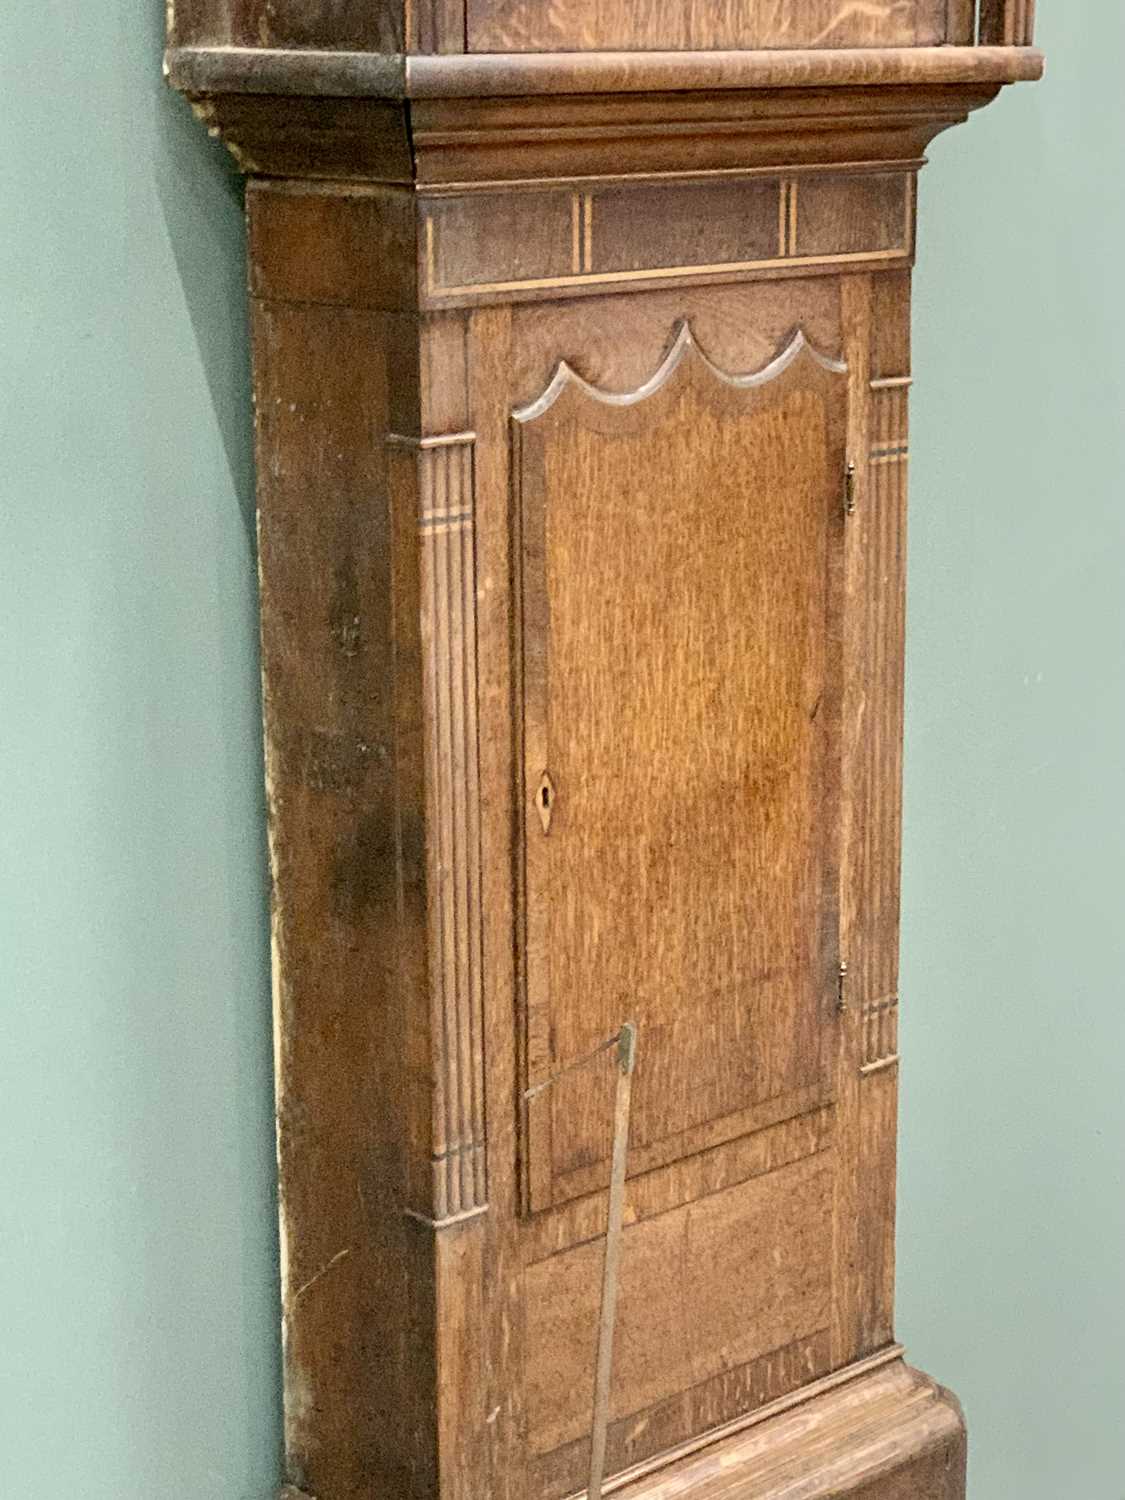 LONGCASE CLOCK - oak cased with mixed woods inlay, eight day movement, painted dial marked "C - Image 4 of 9